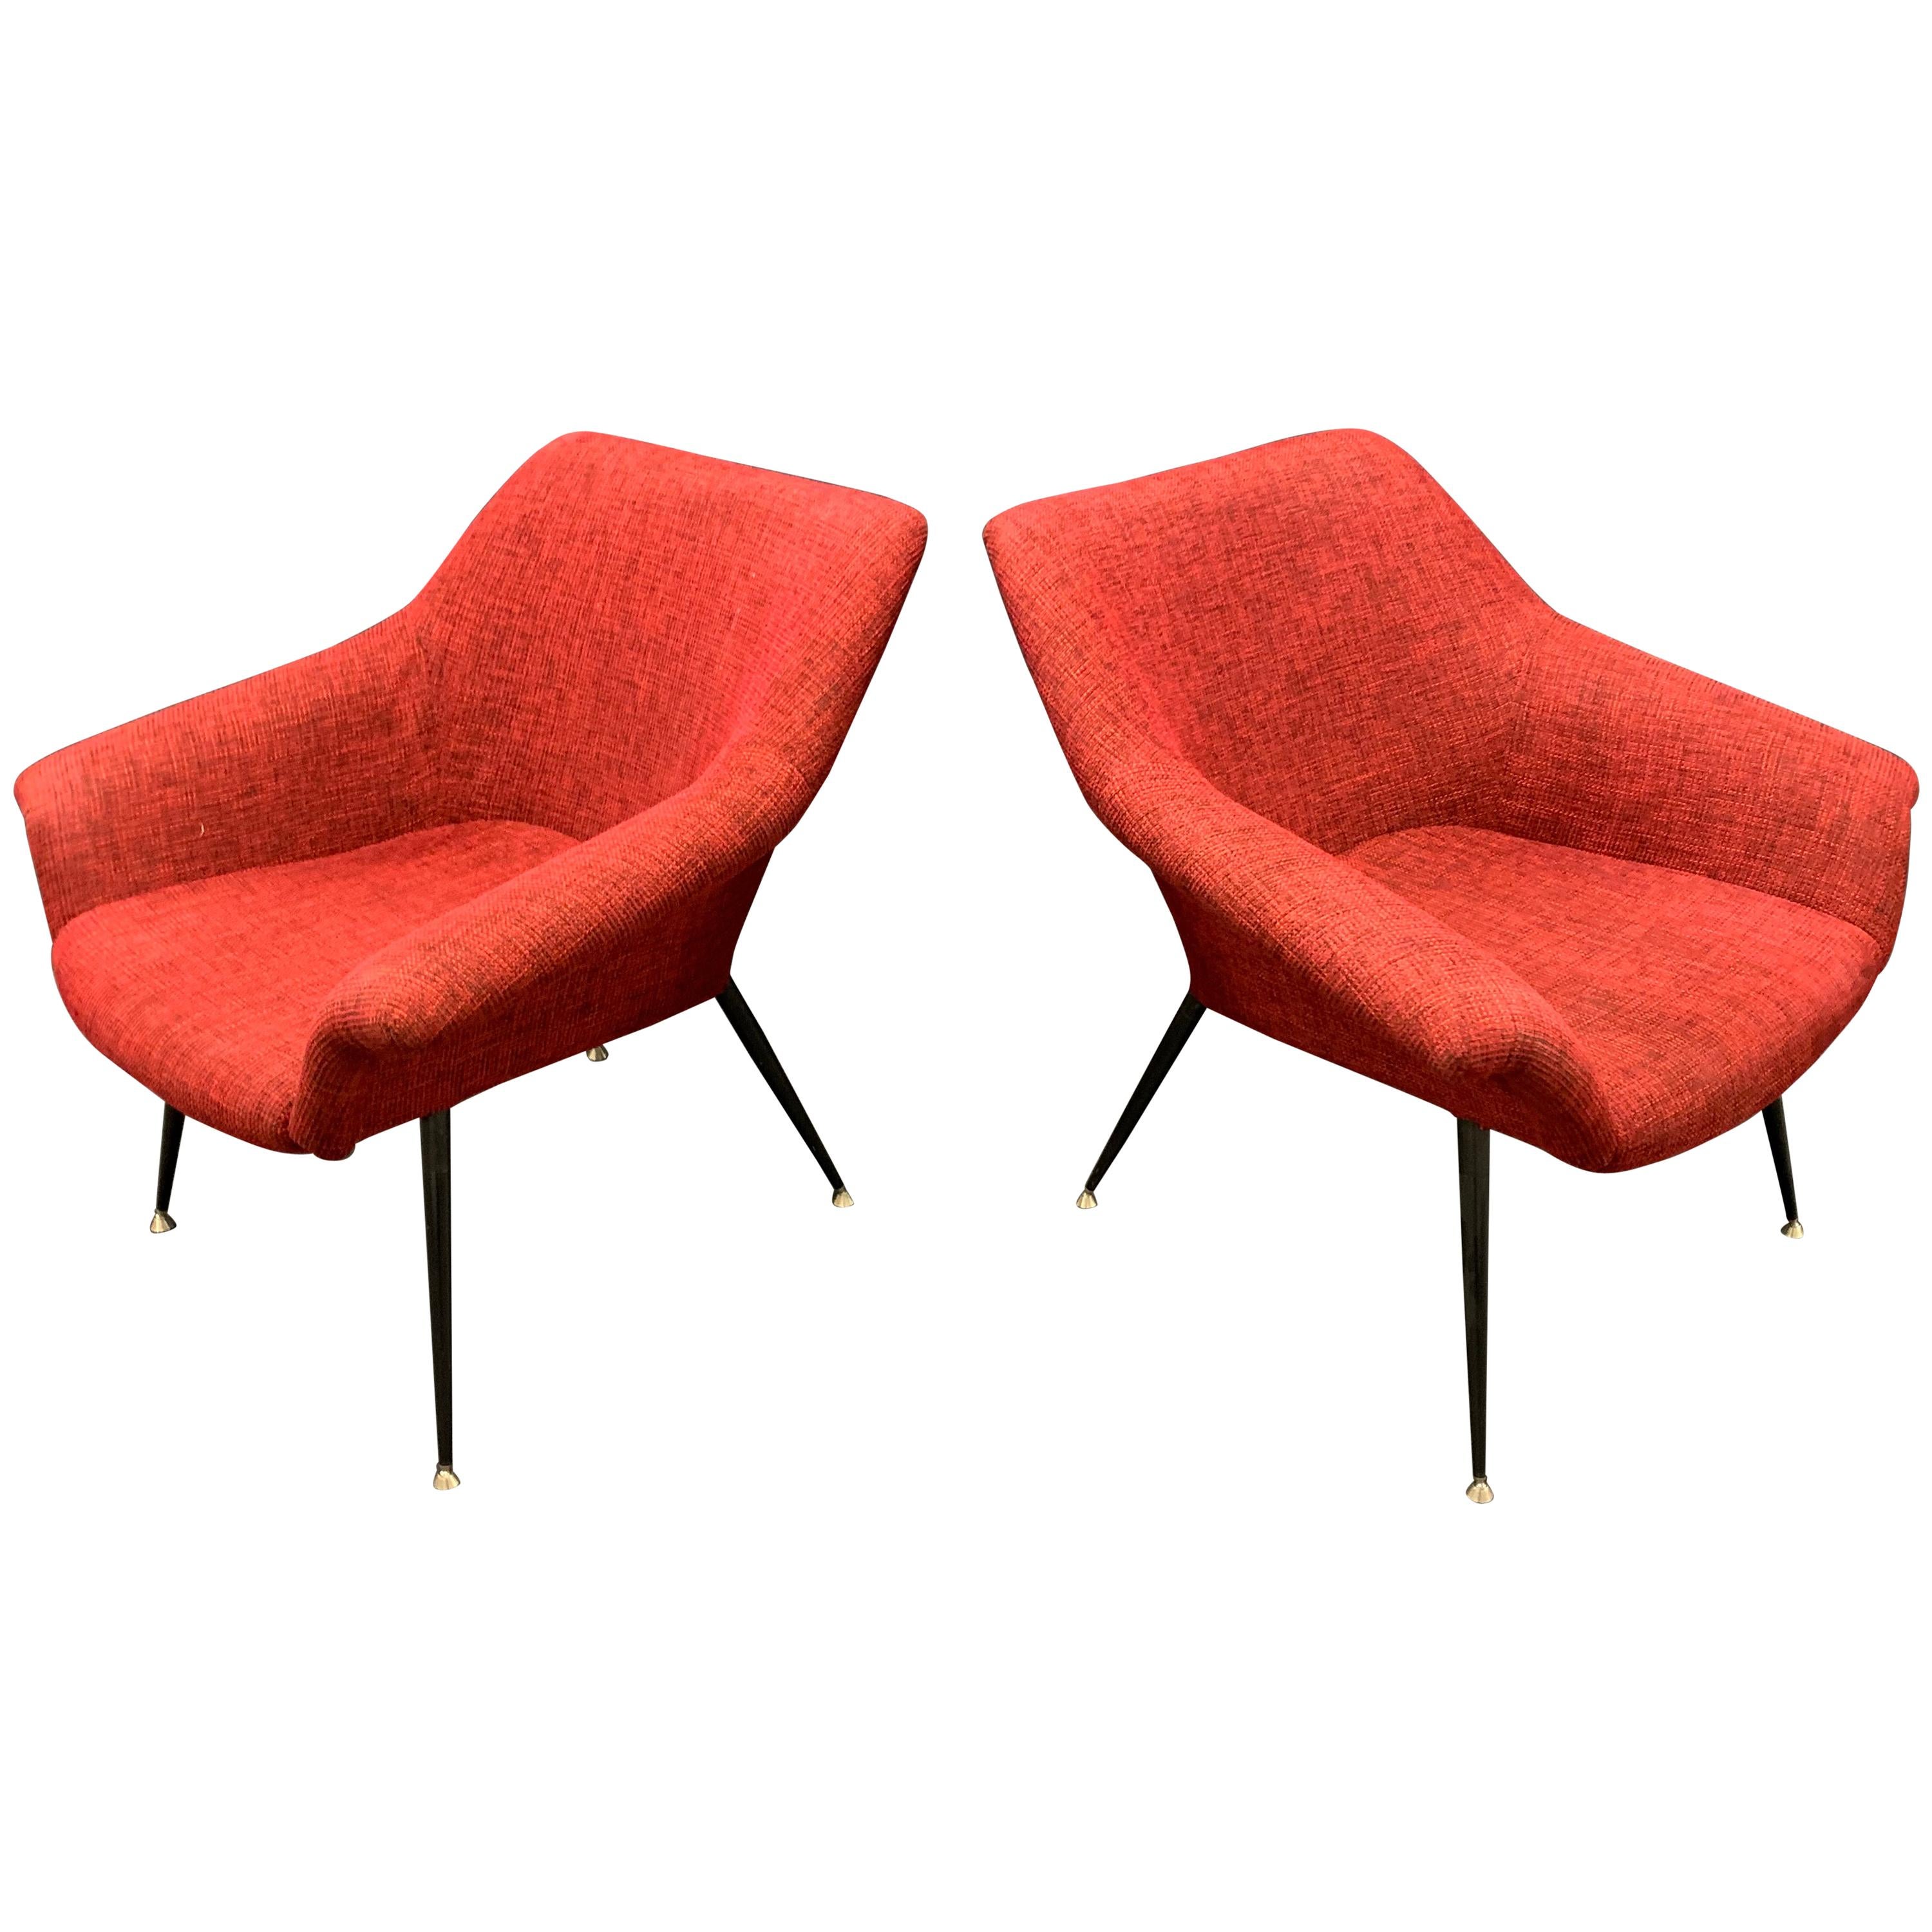 Set of 2 Italian Lounge Chairs For Sale